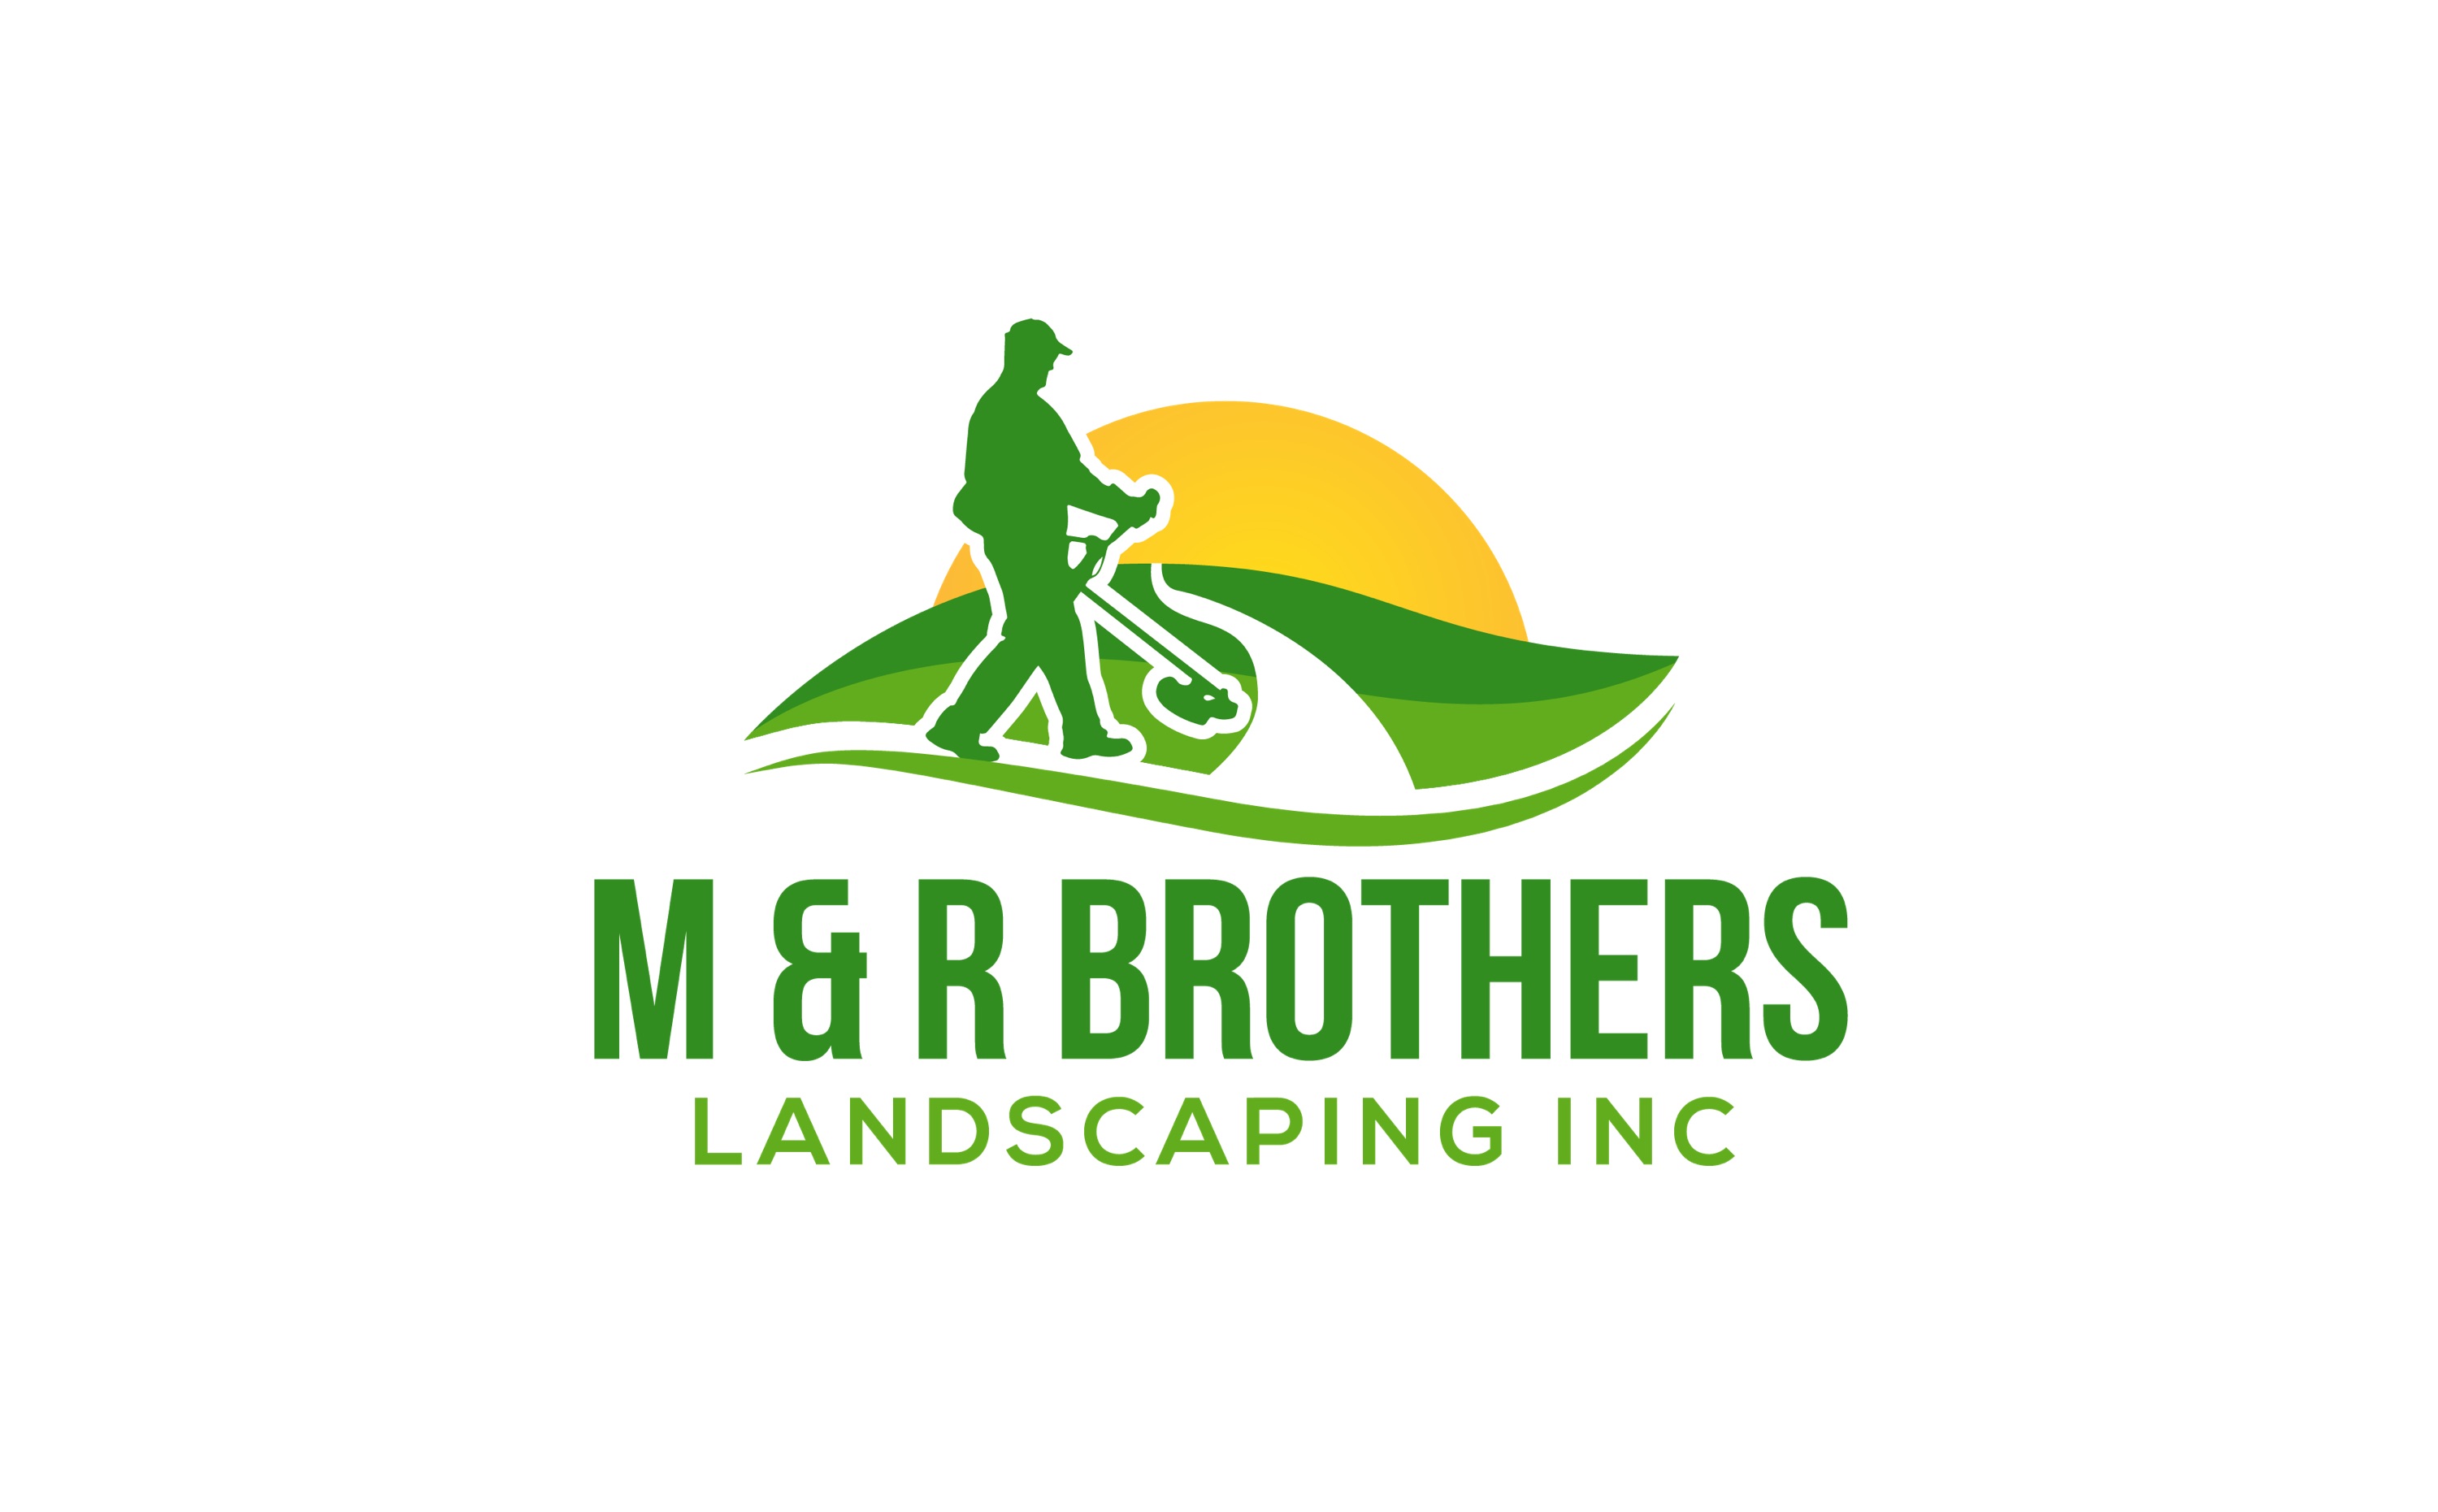 M & R Brothers Landscaping Inc Logo